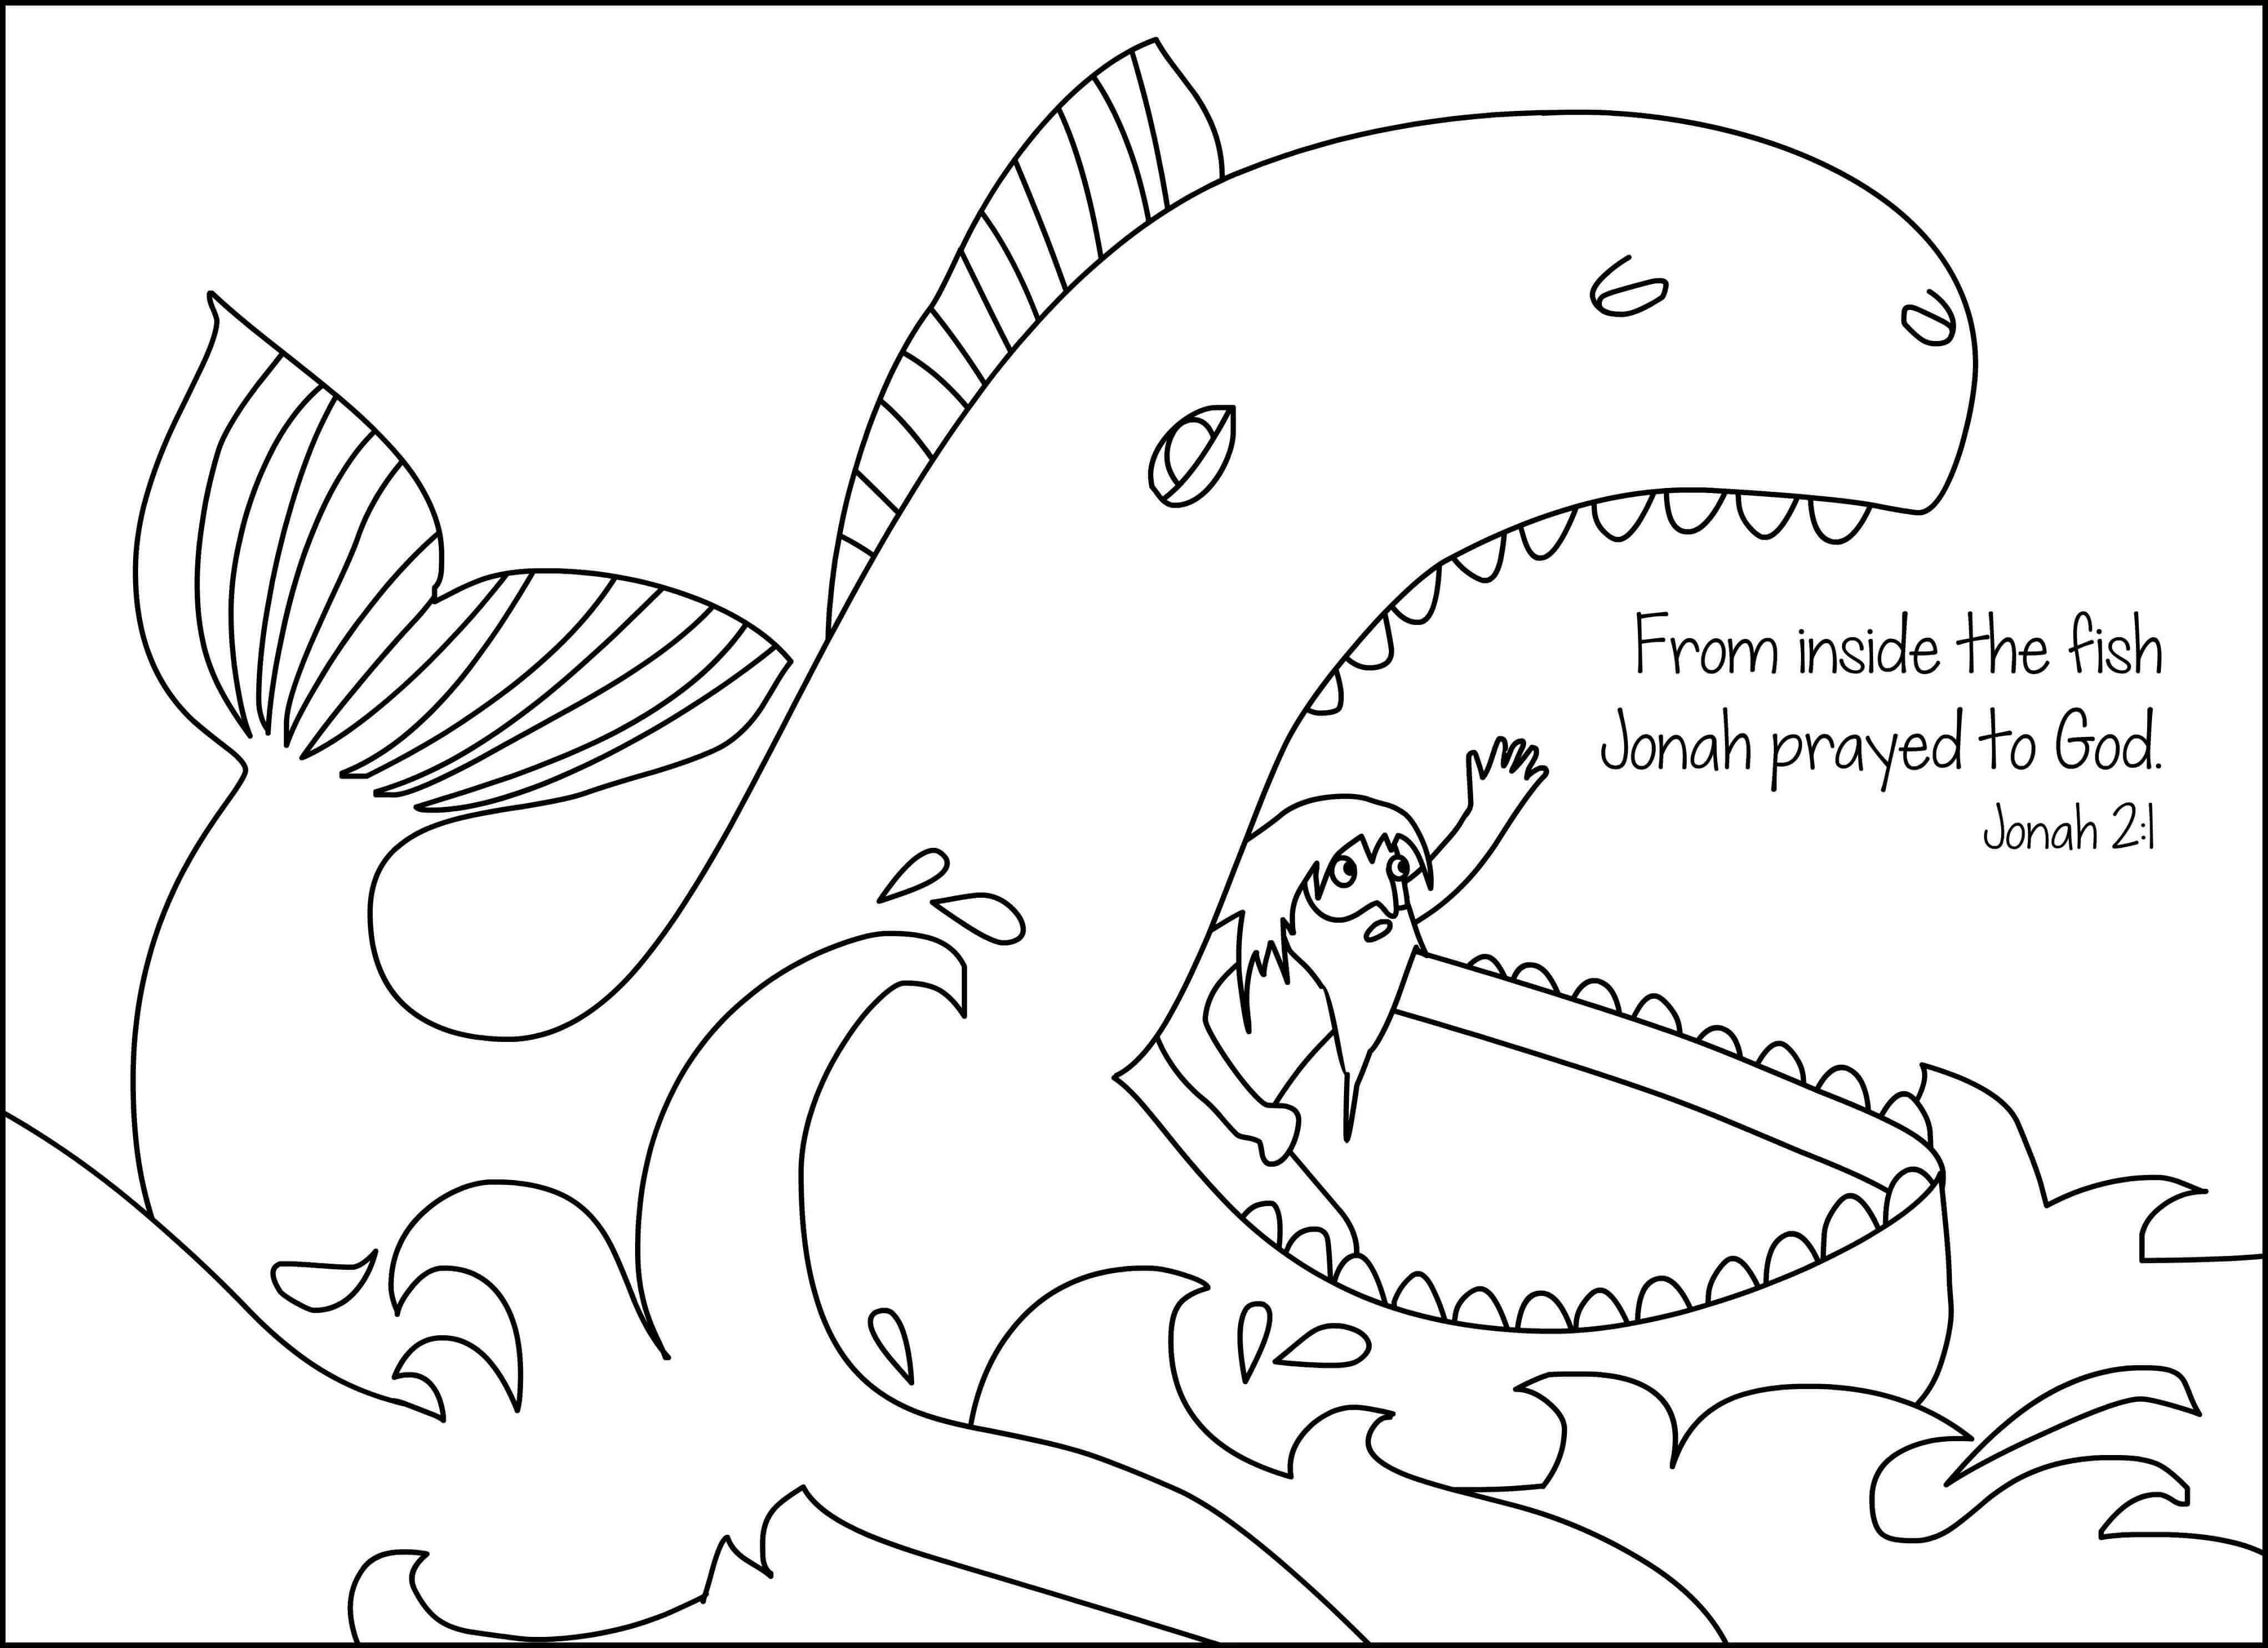 Miranda on x new post free printable jonah and the whale coloring pages has been published on new hd wallpapers